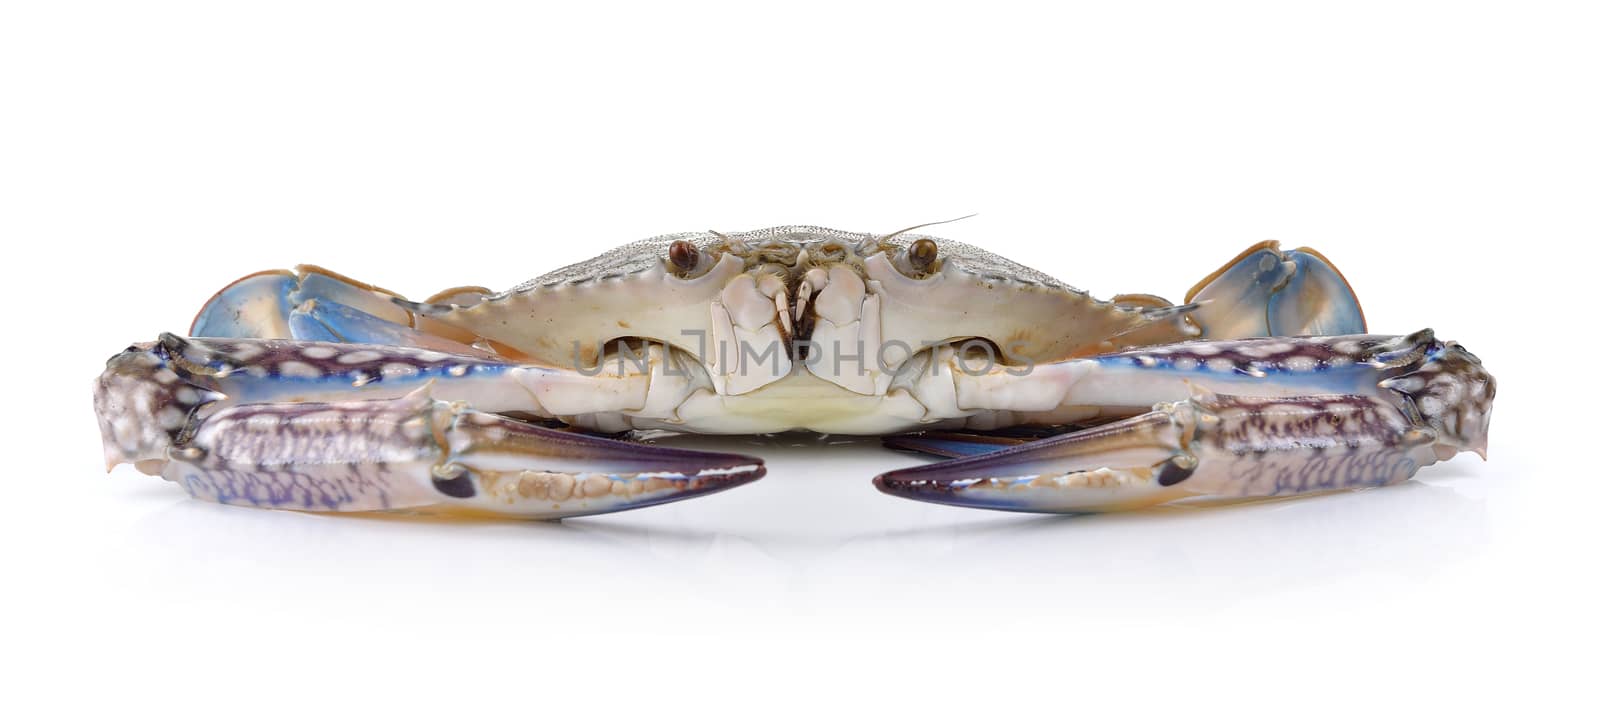 Blue Swimming Crabs on white background by sommai